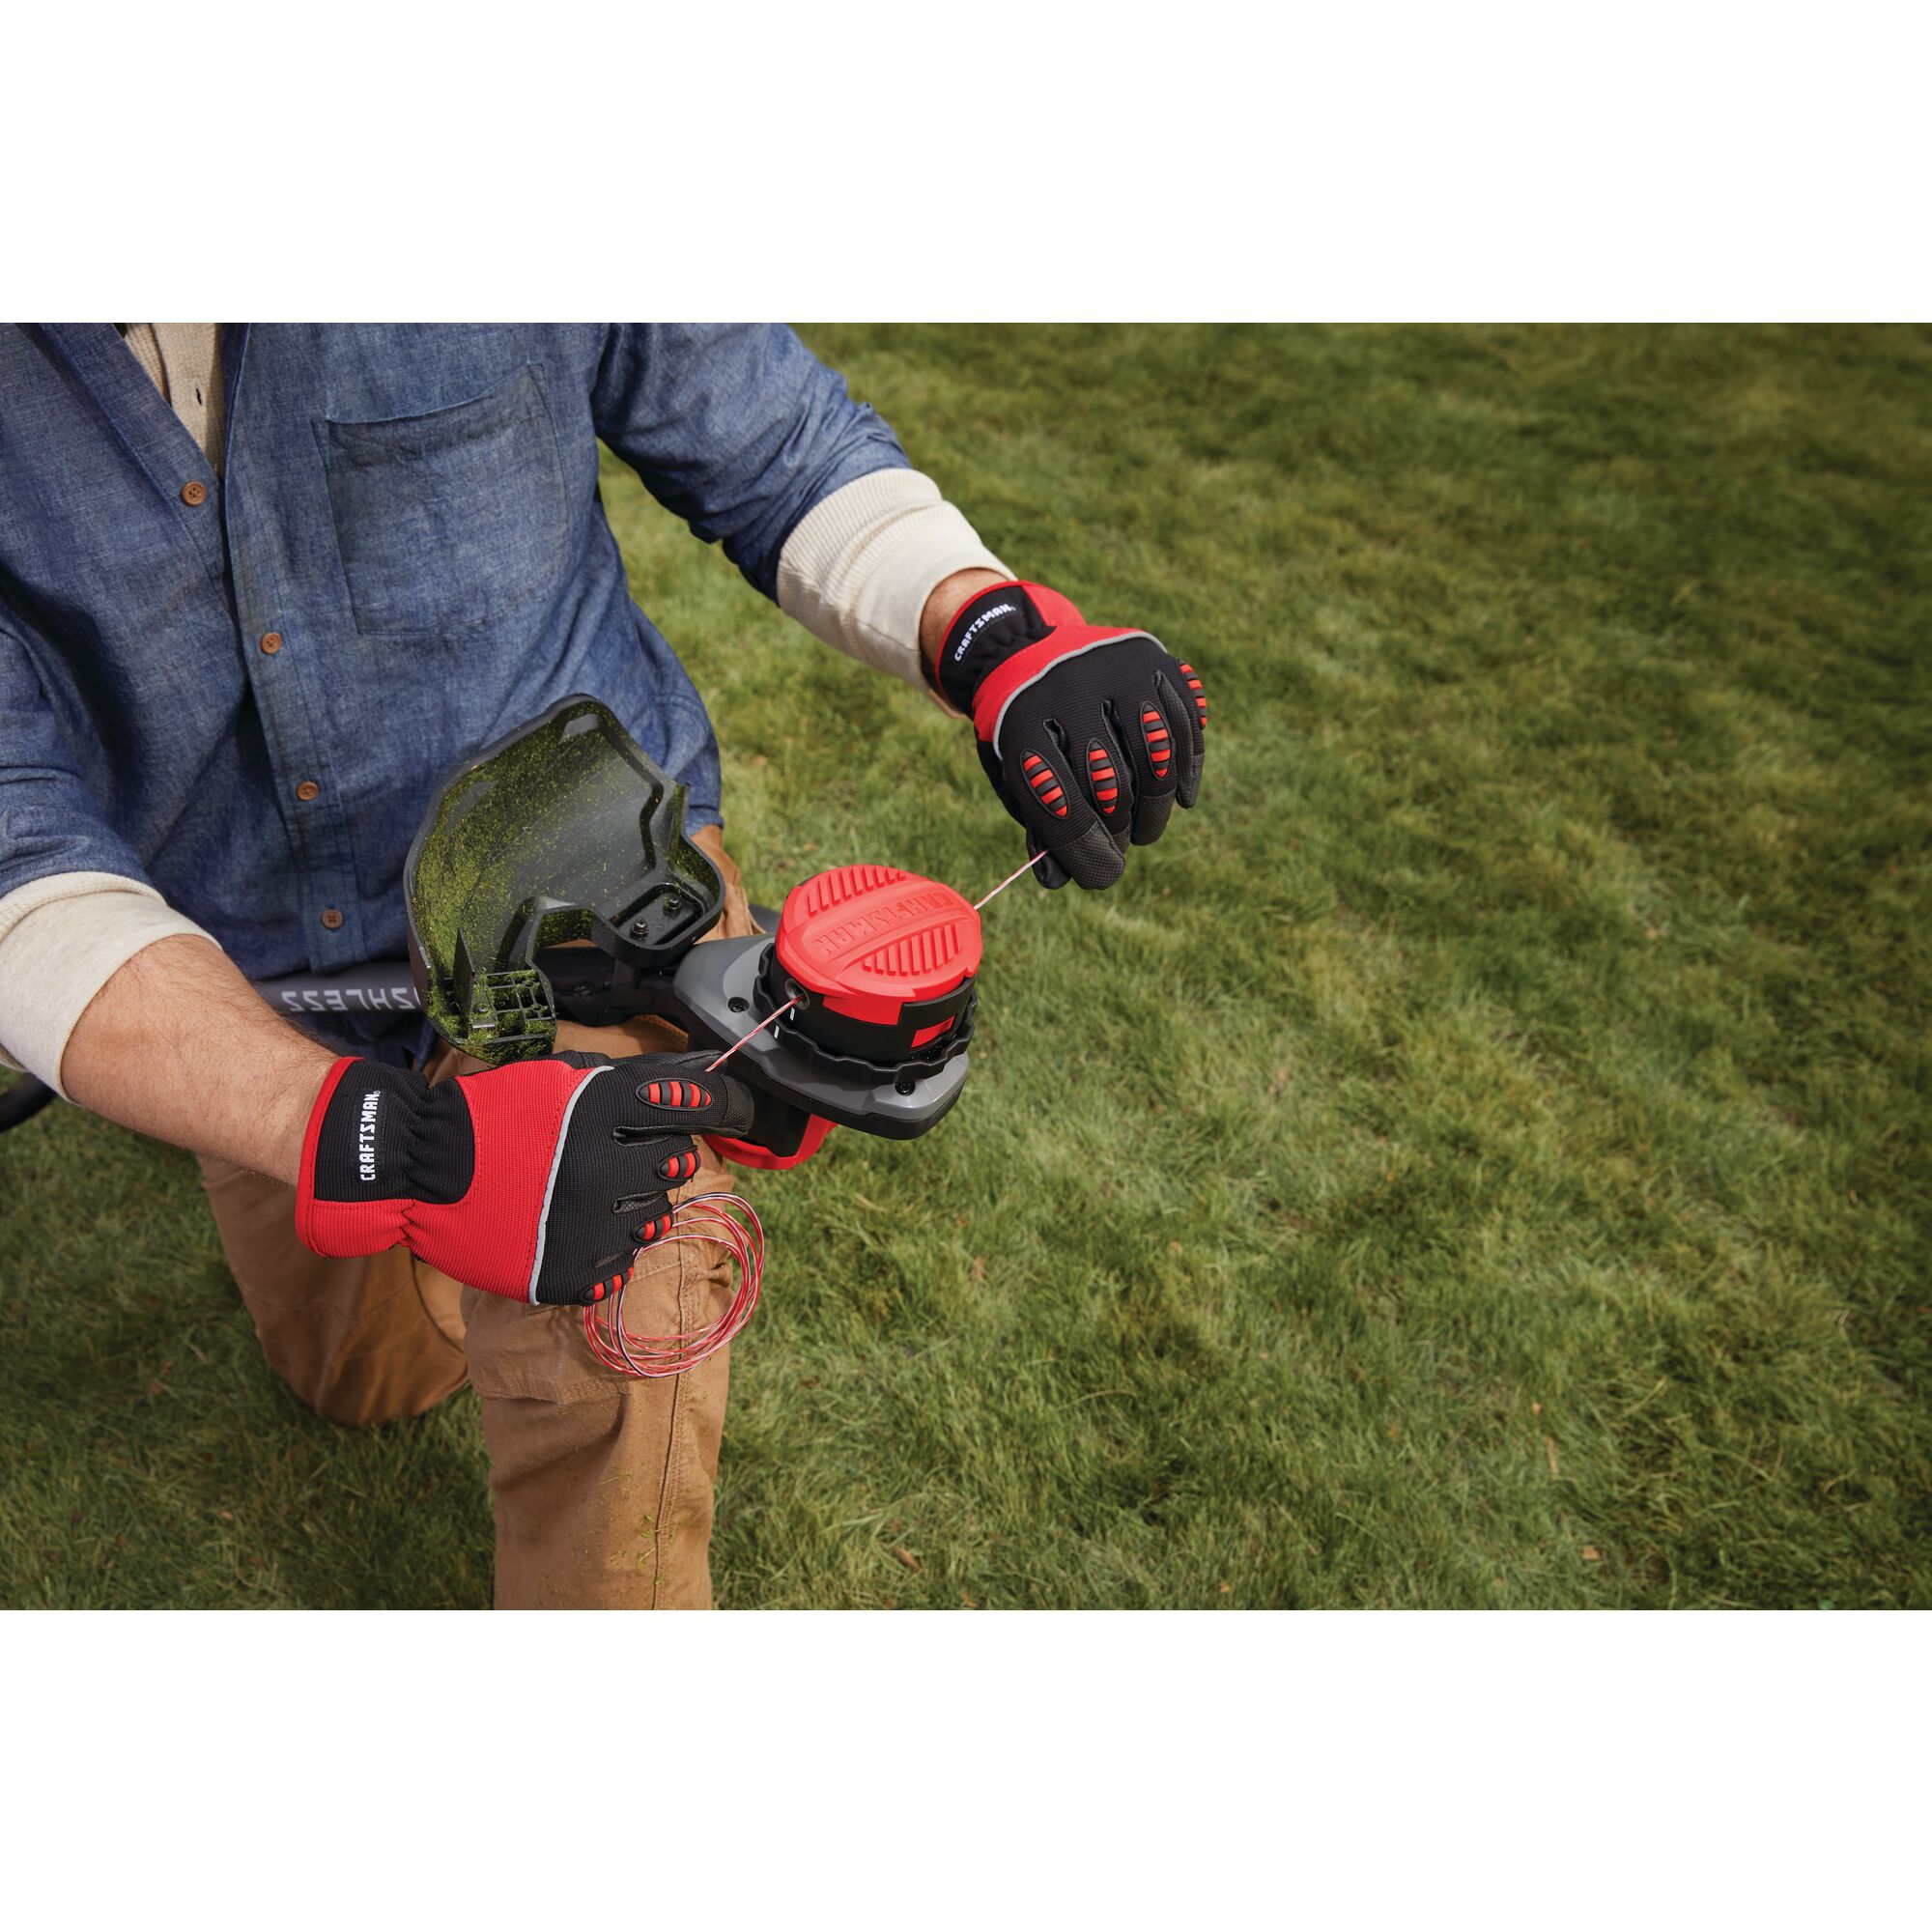 Brushless motor feature of 60 volt cordless 15 inch brushless weedwacker string trimmer with quickwind kit 2.5 ampere per hour.